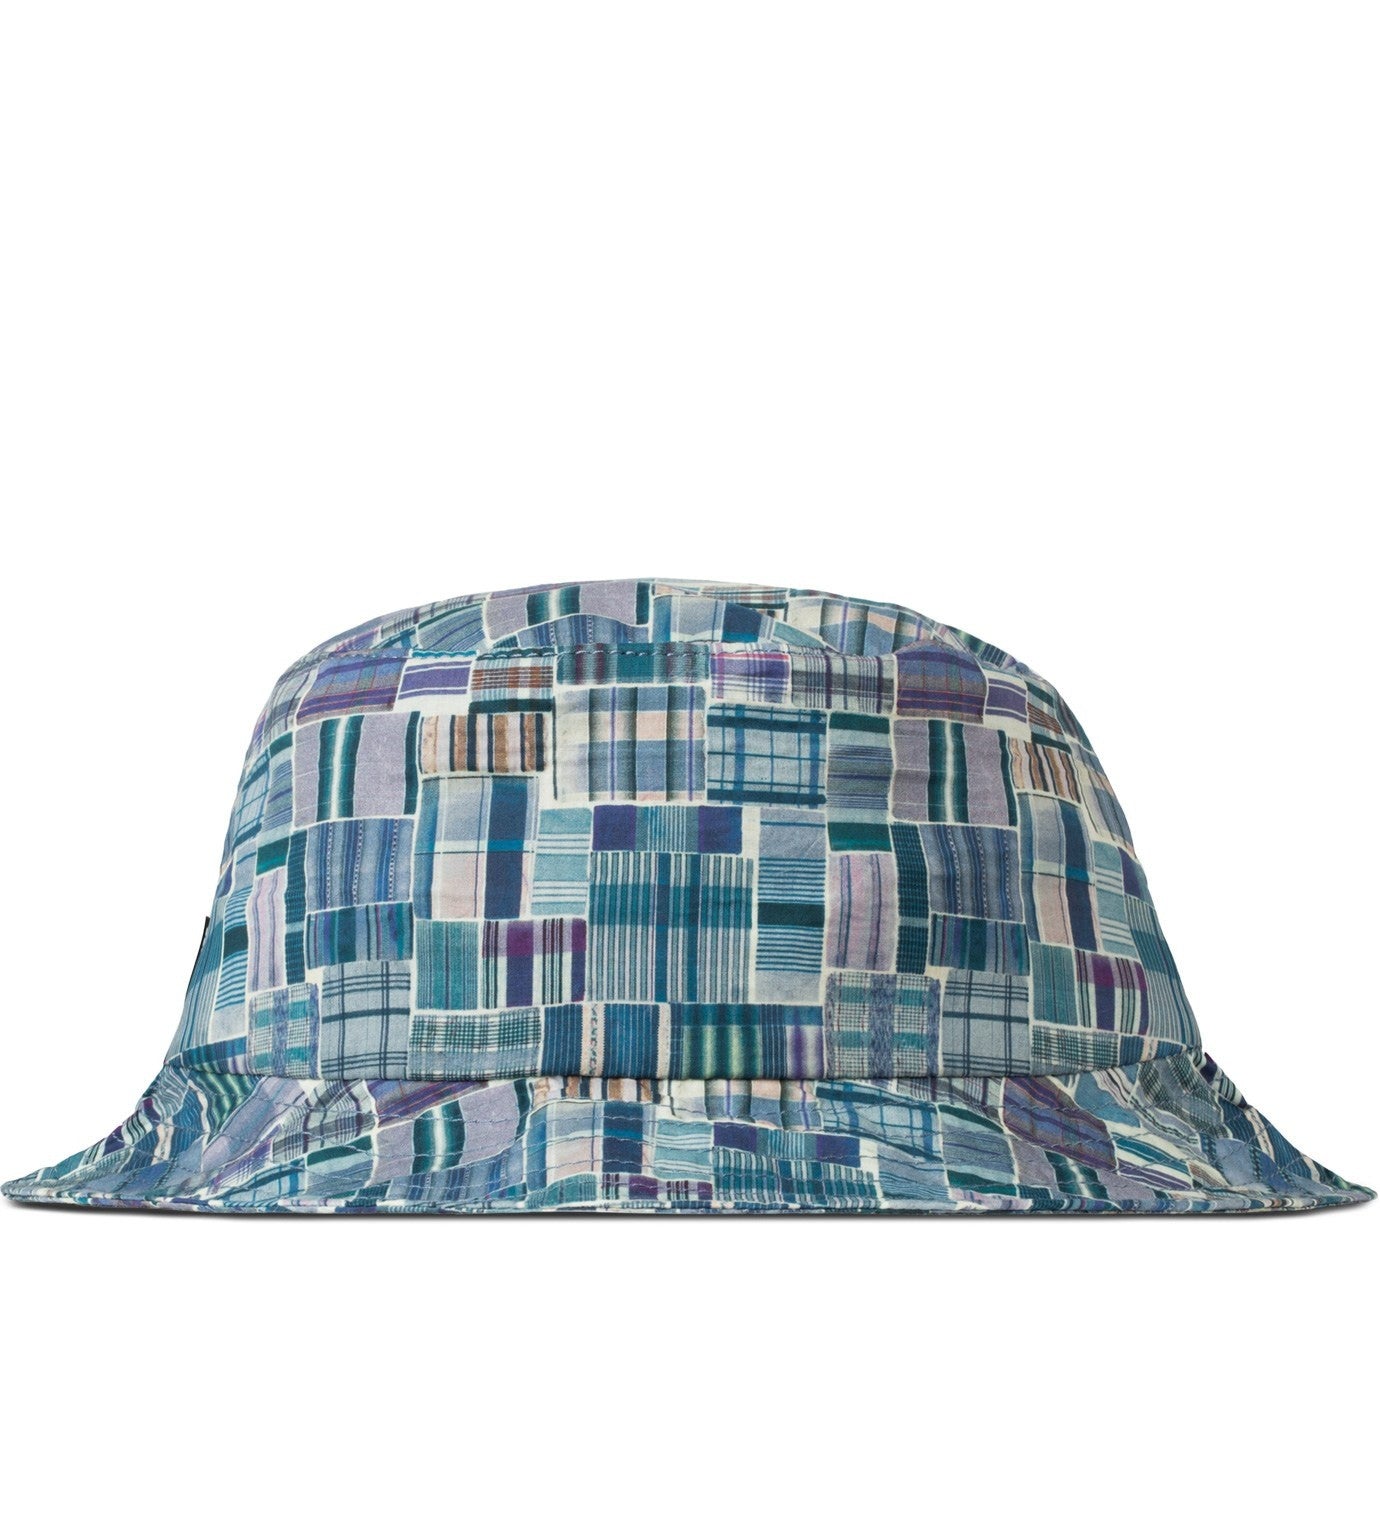 The Quiet Life - Liberty Madras Bucket Hat, Blue - The Giant Peach